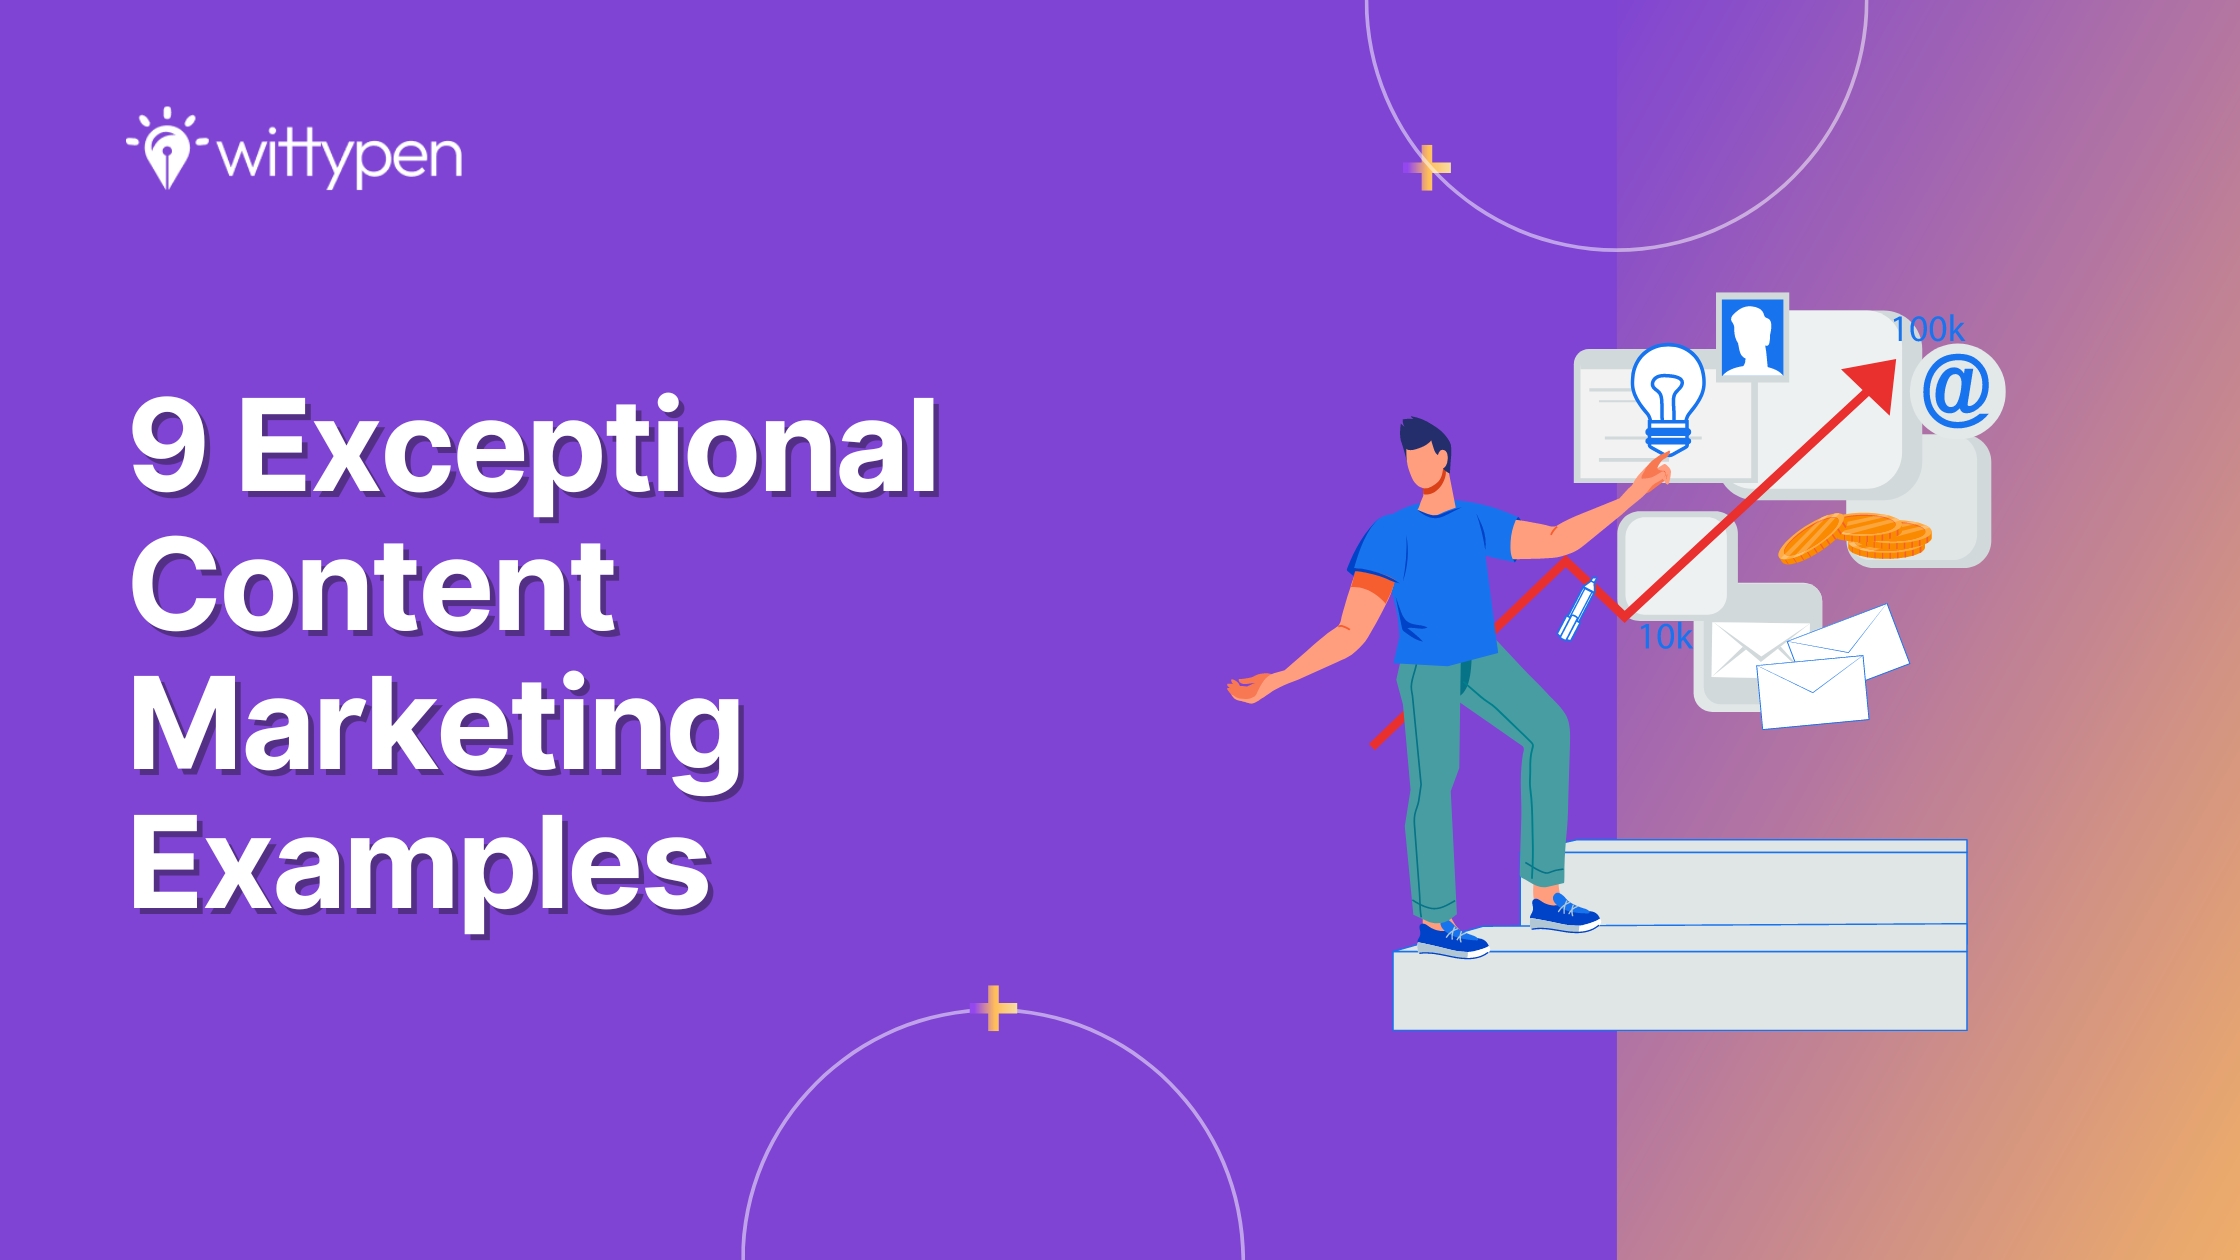 9 Exceptional Content Marketing Examples